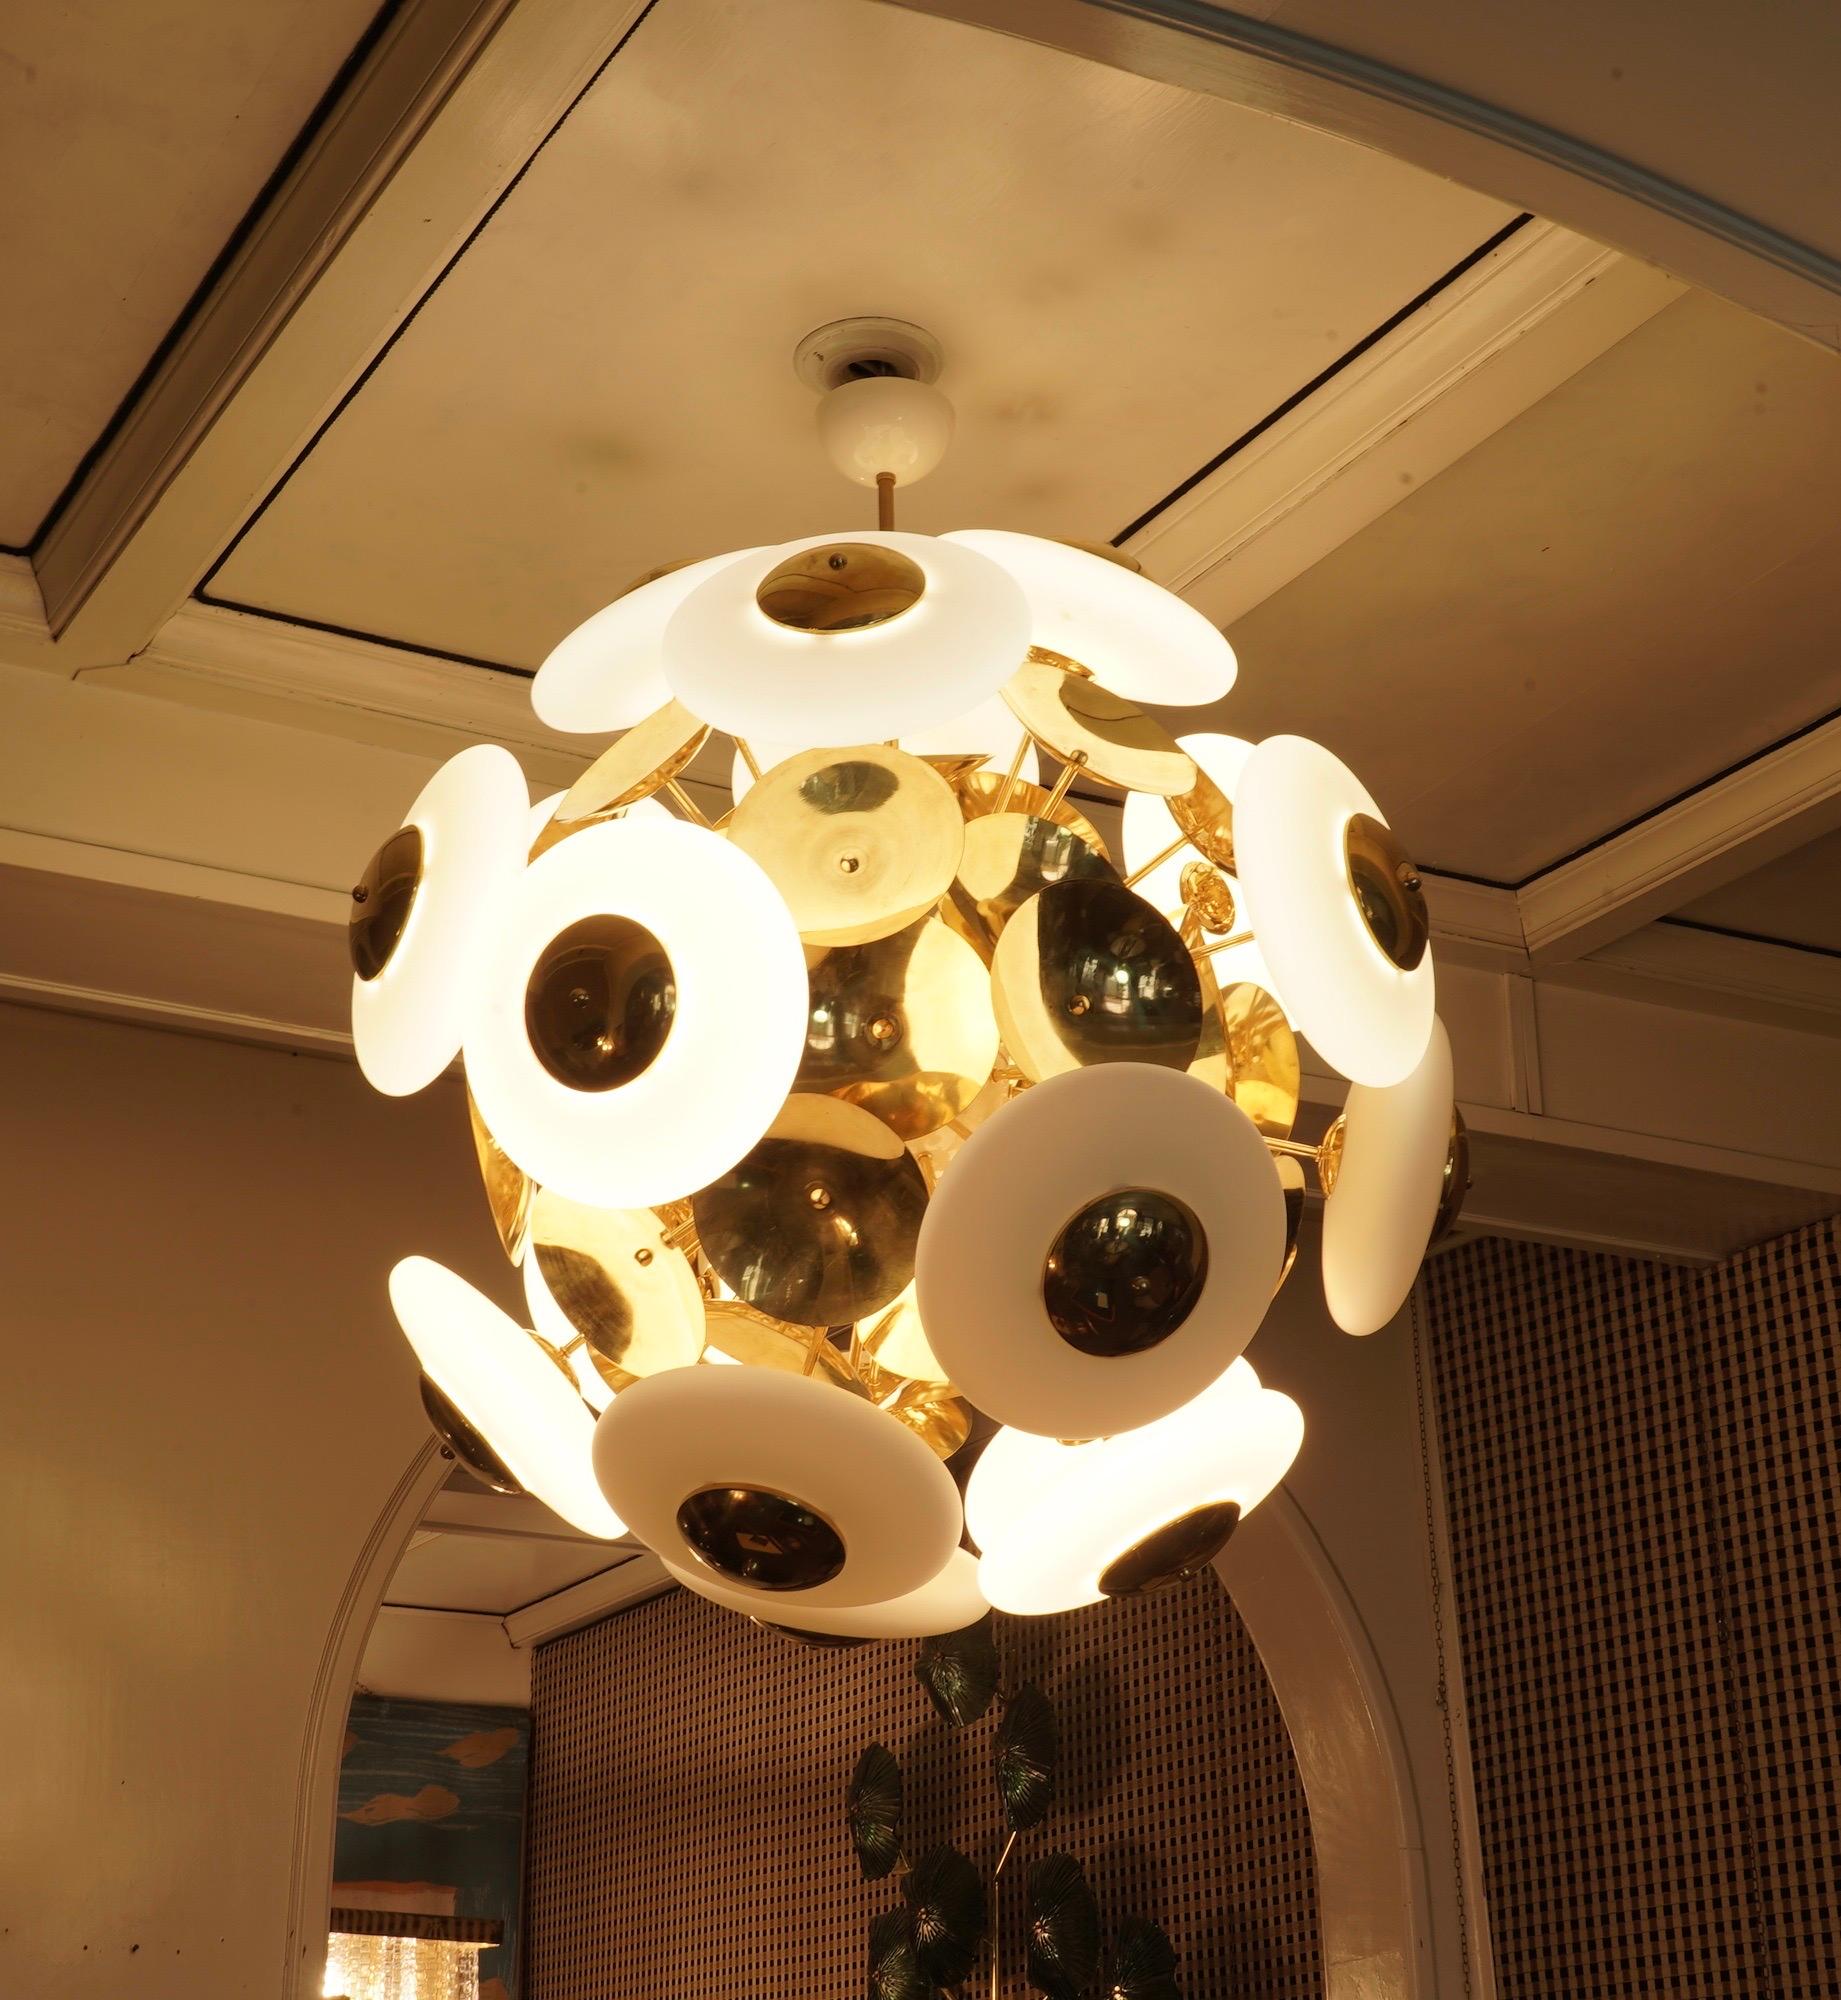 Amazing design for a Murano glass chandelier from the 1970s, due to its very particular shape of these flattened spheres.

The chandelier is formed by a large central sphere, in which brass rods have been screwed. On each brass rod there is either a